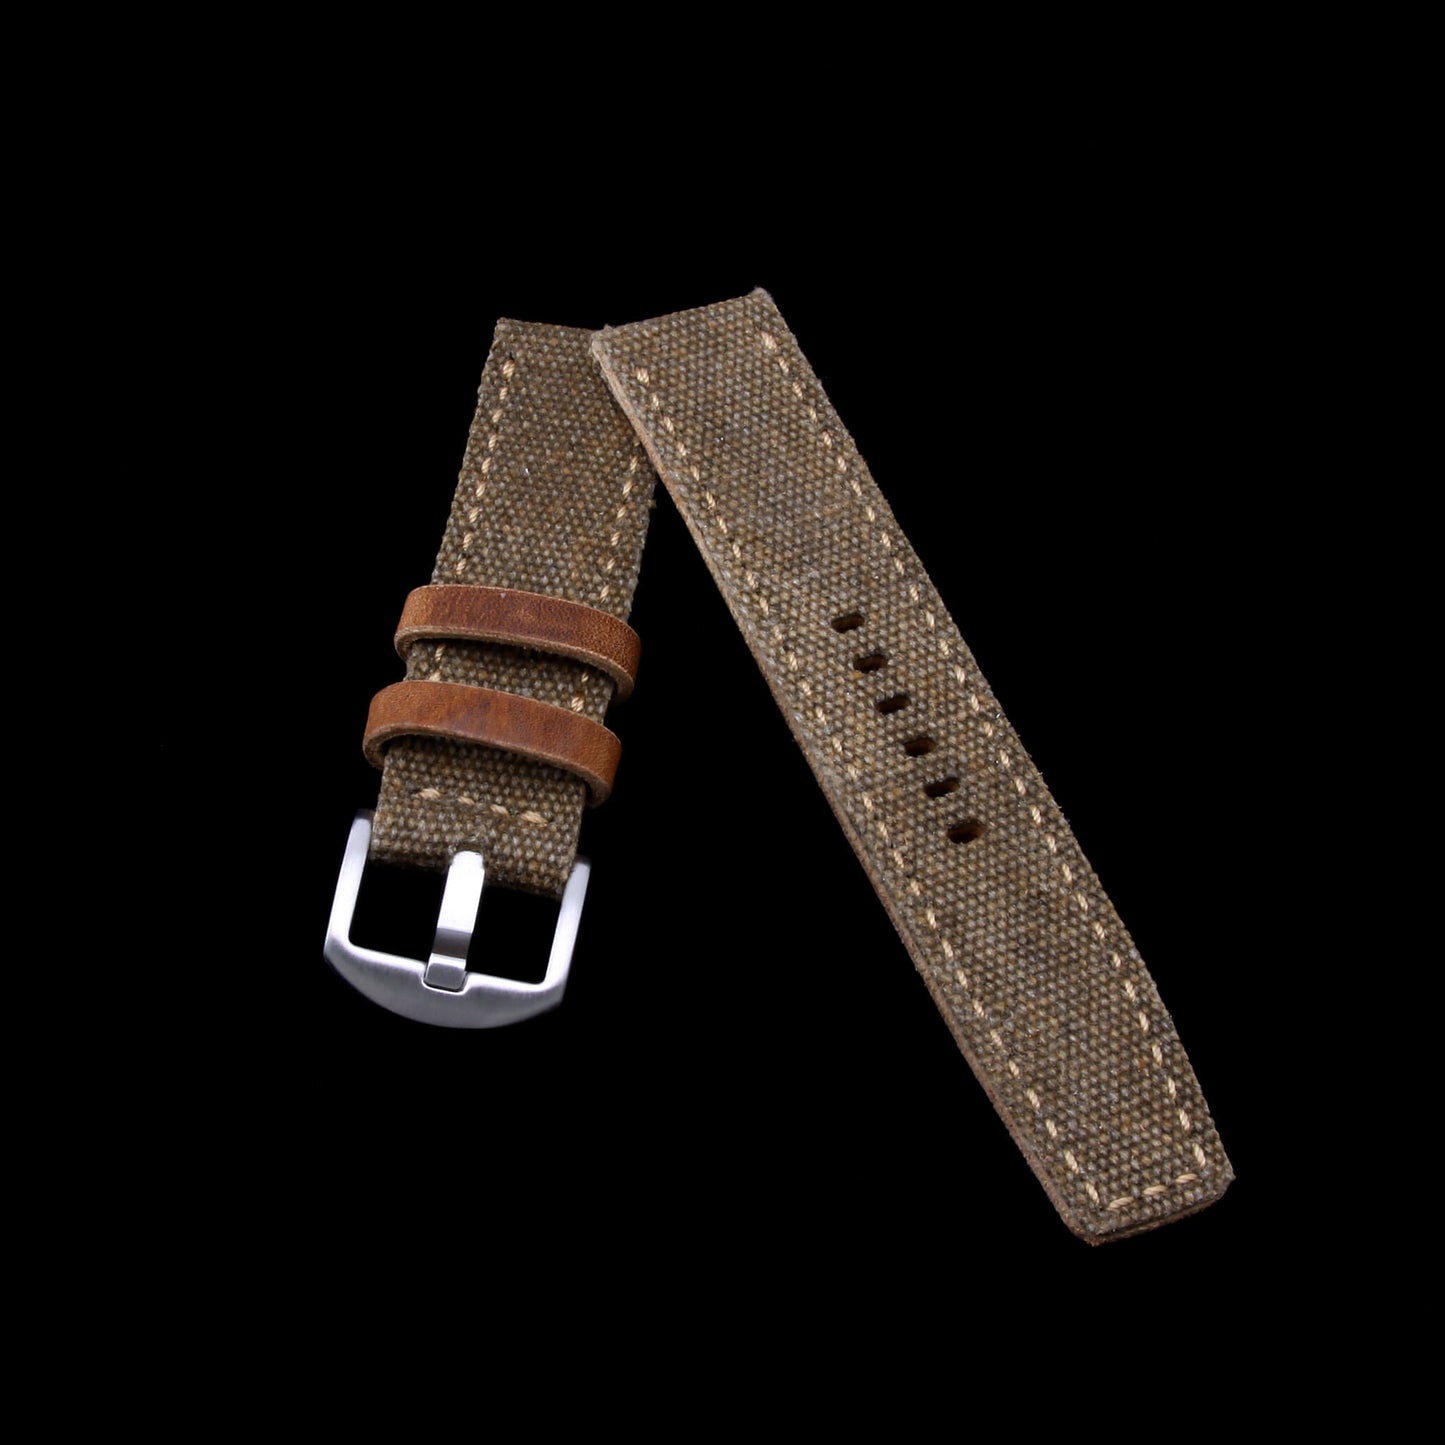 2-Piece Full Stitch Leather Watch Strap, made with Rustic Brown Canvas and Italian veg-tanned leather lining, handcrafted by Cozy Handmade